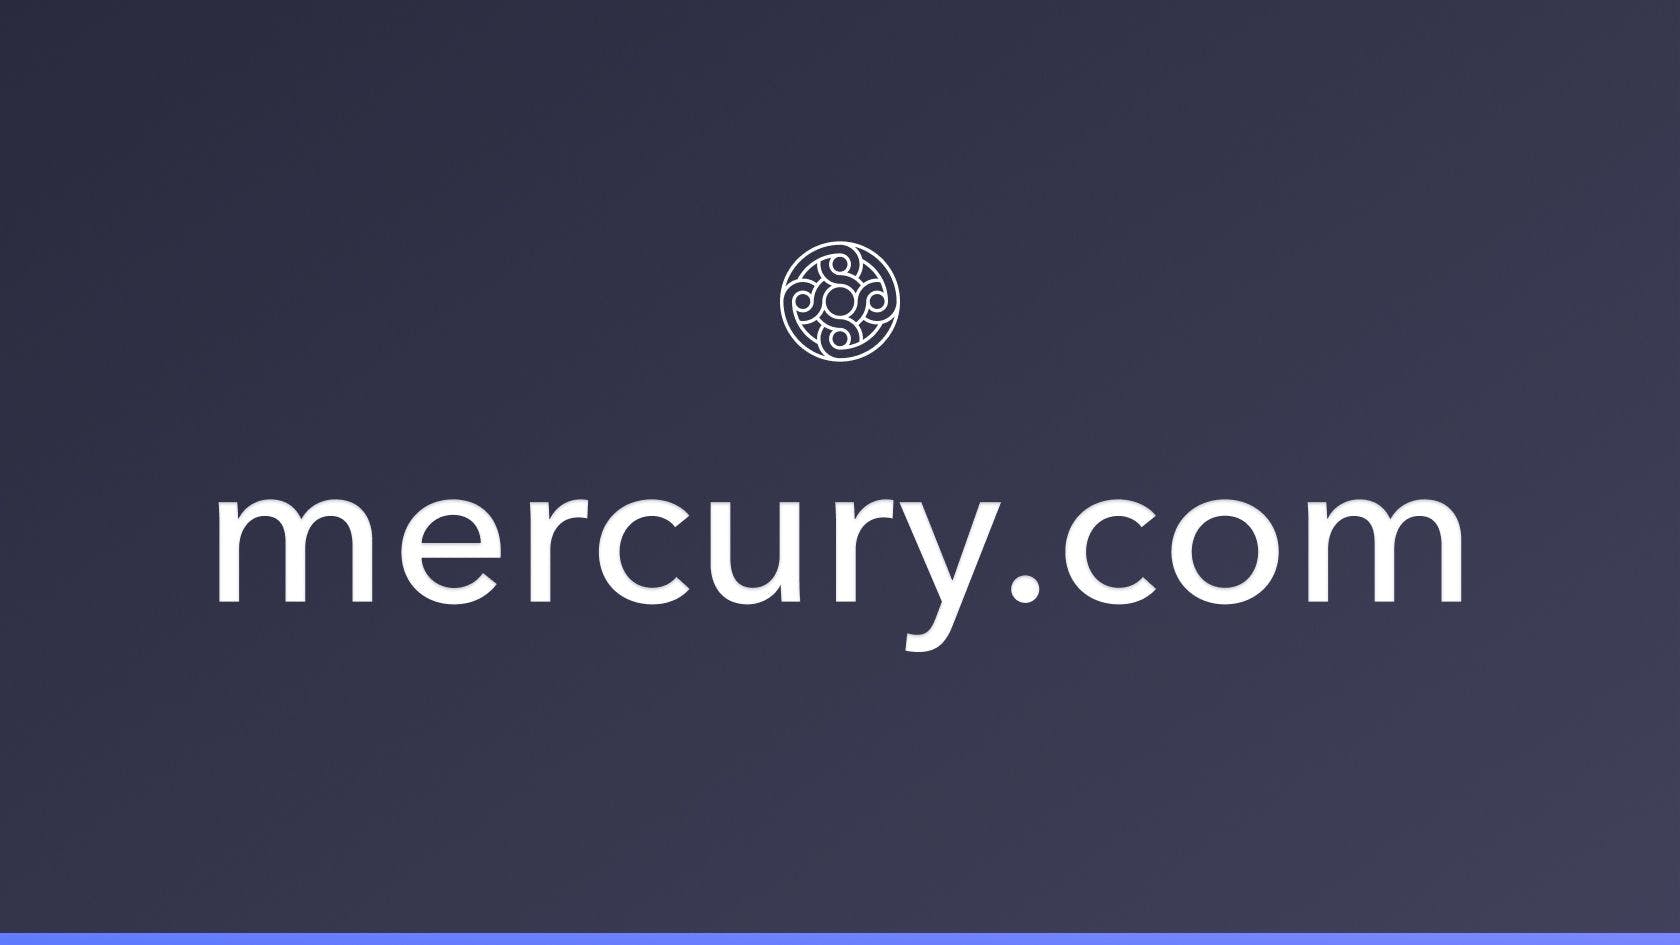 Moving to Mercury.com and new feature updates